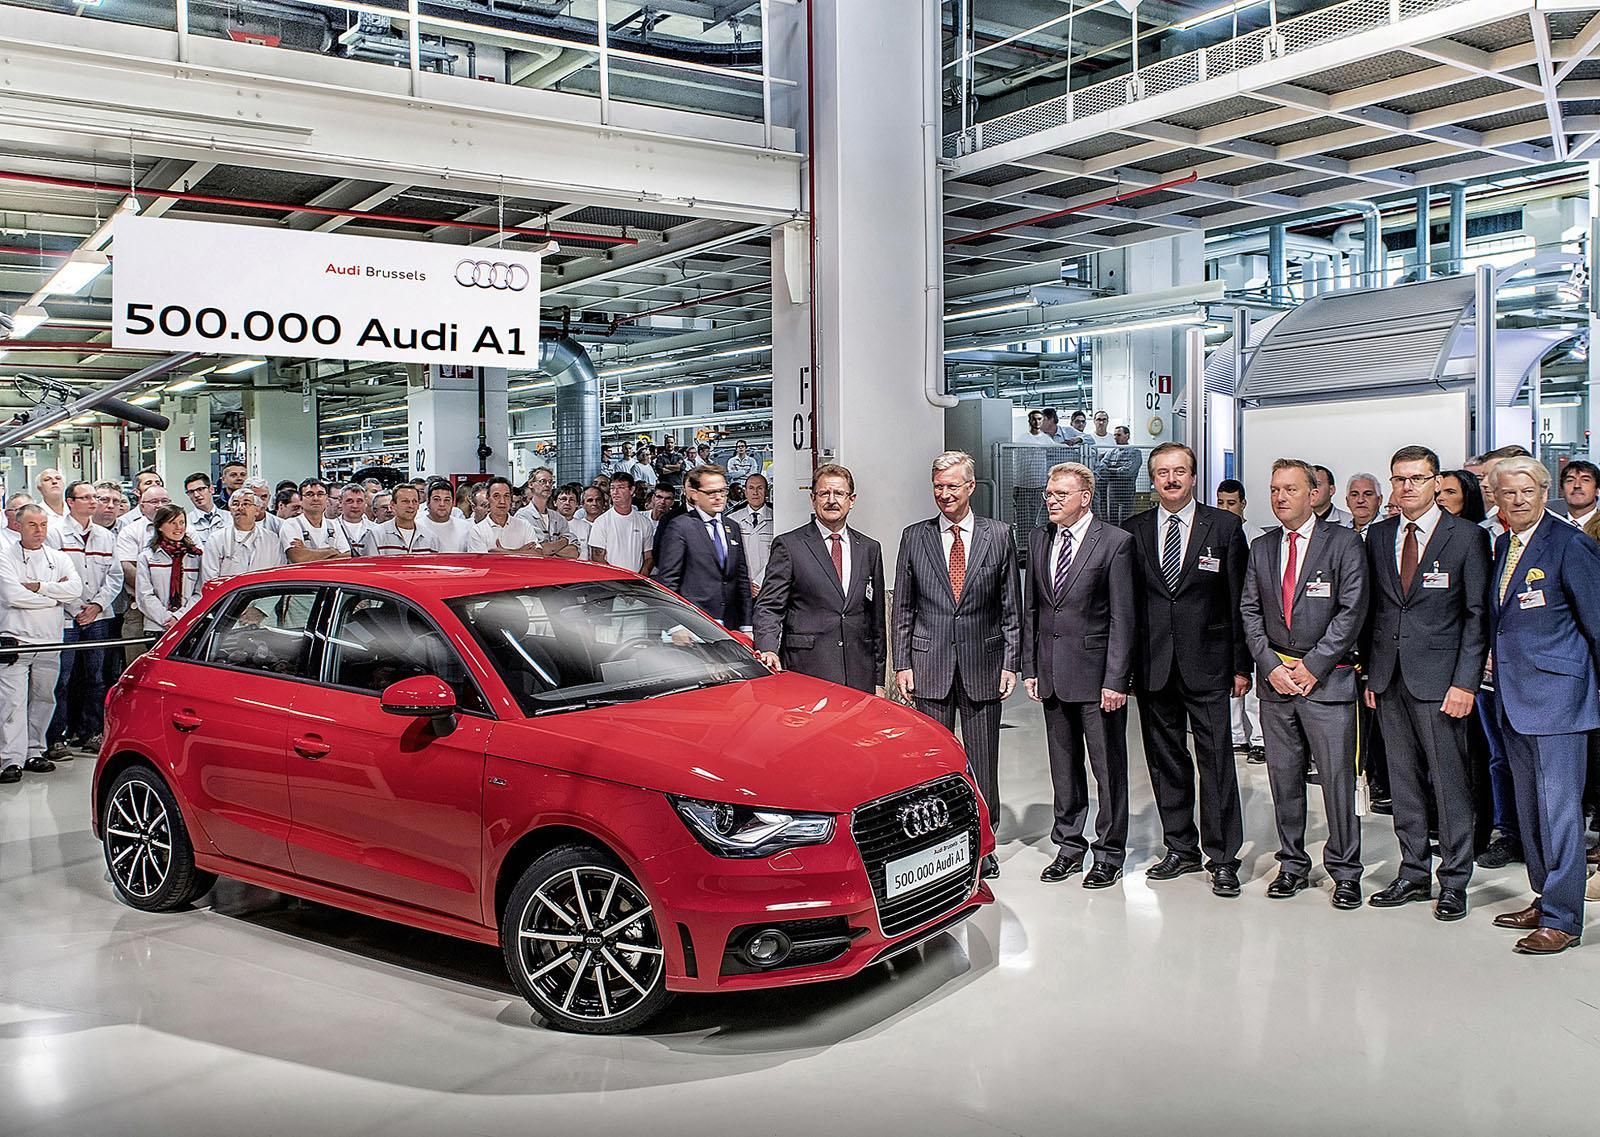 Audi rolls out 500,000th A1 from Brussels Plant